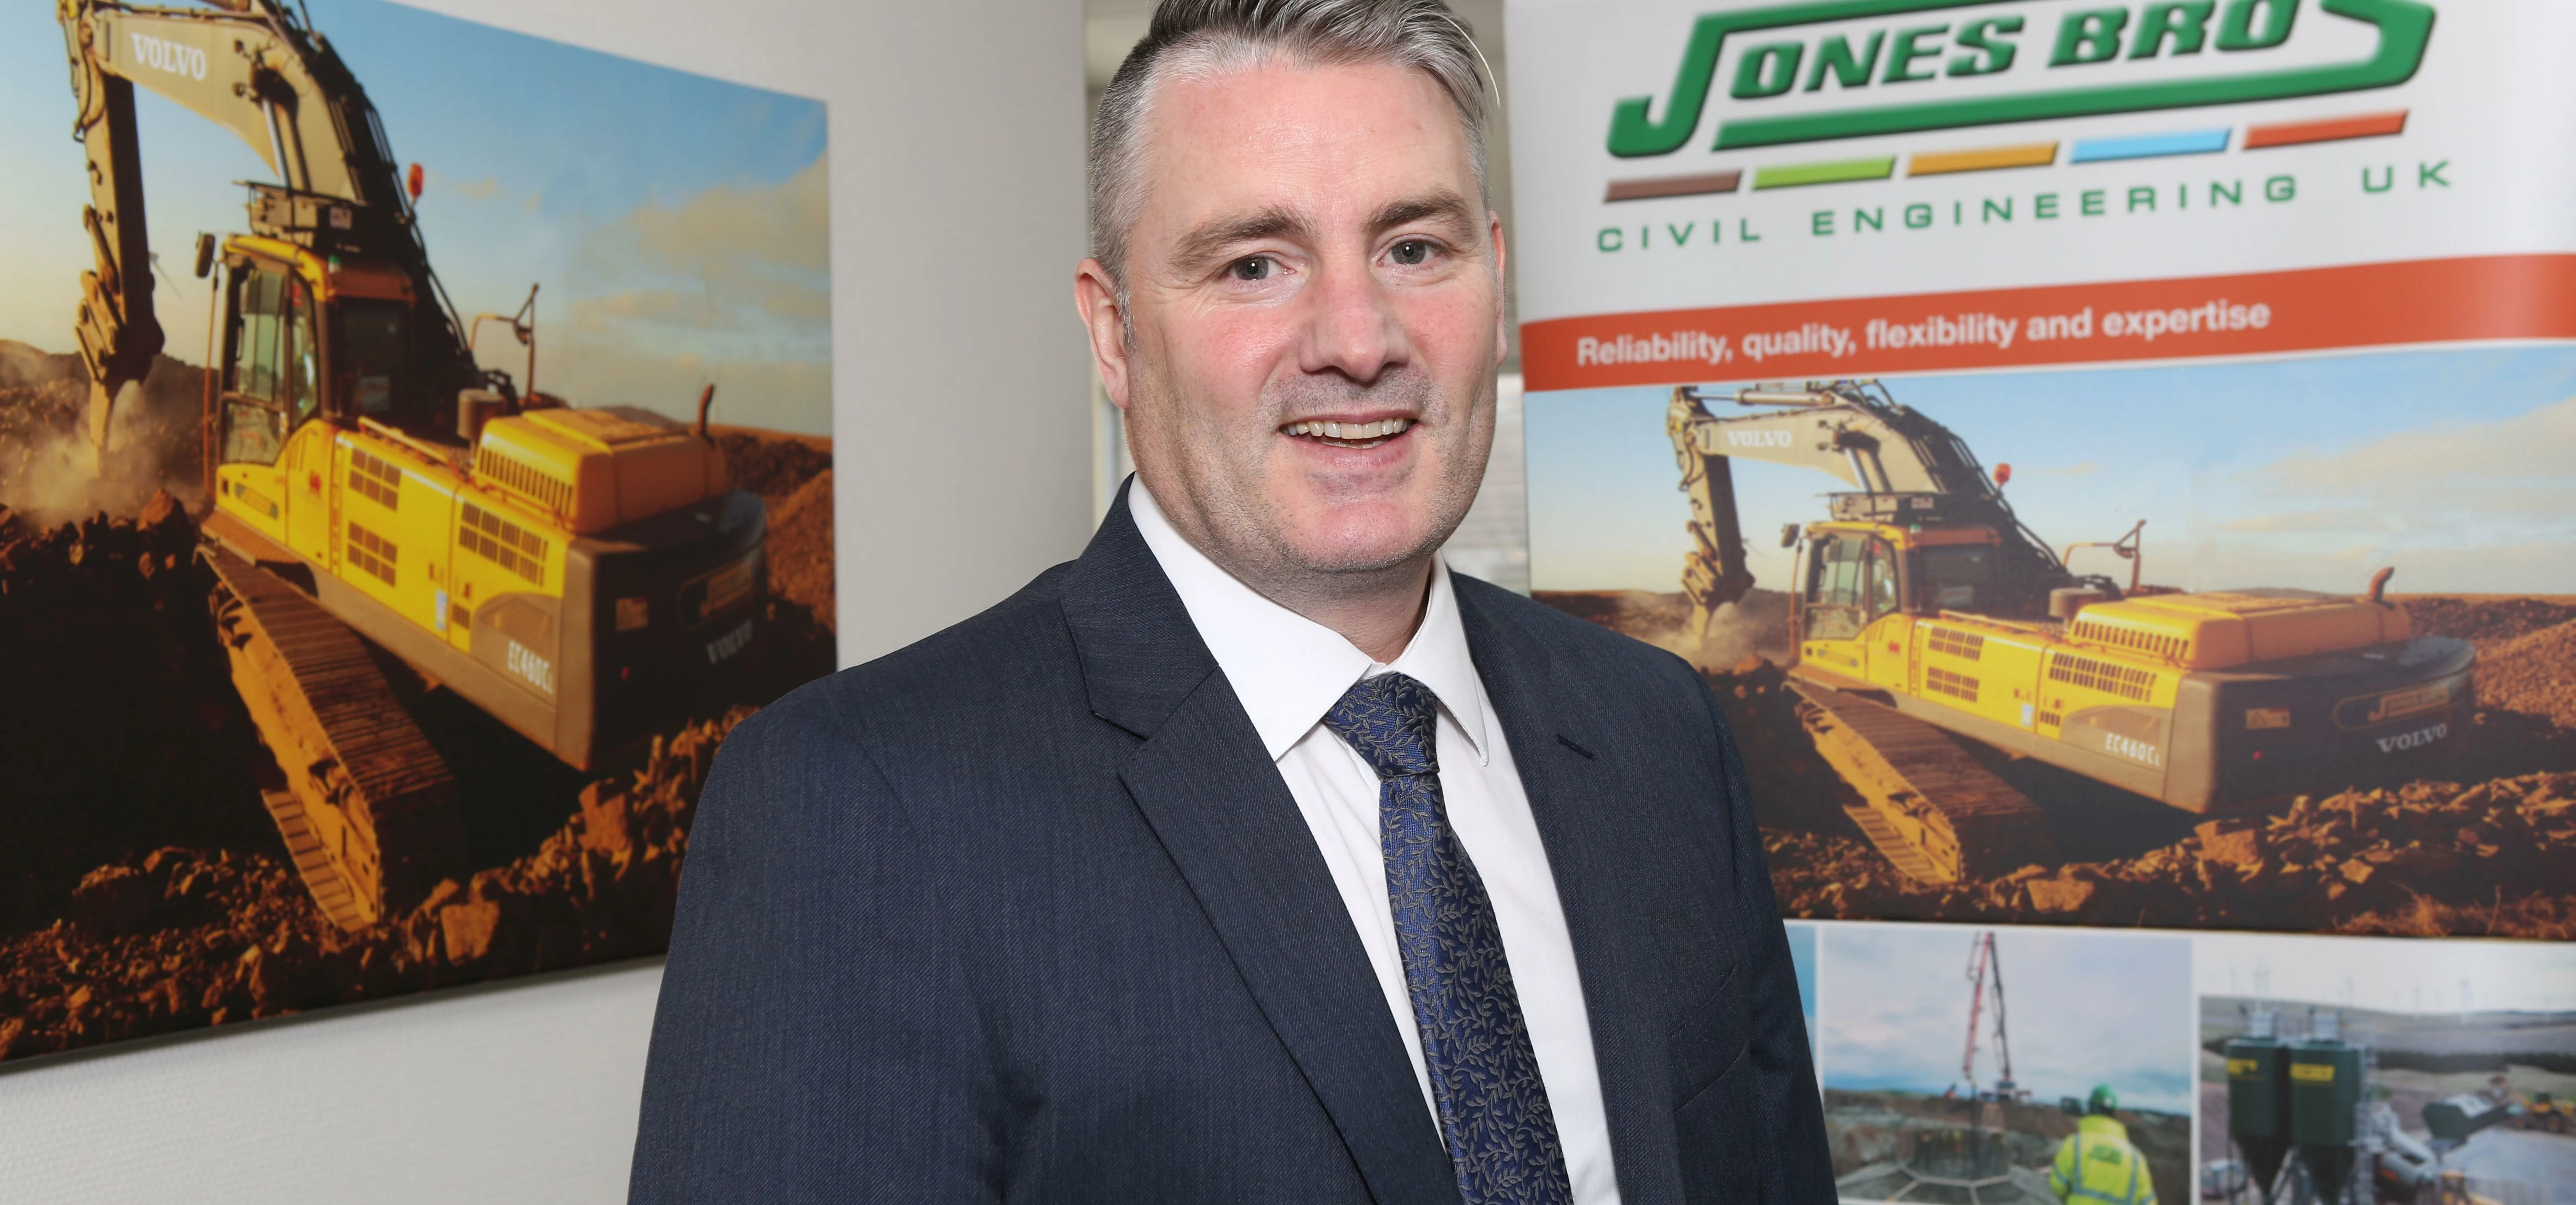 Newly appointed highways manager Mike Jones 